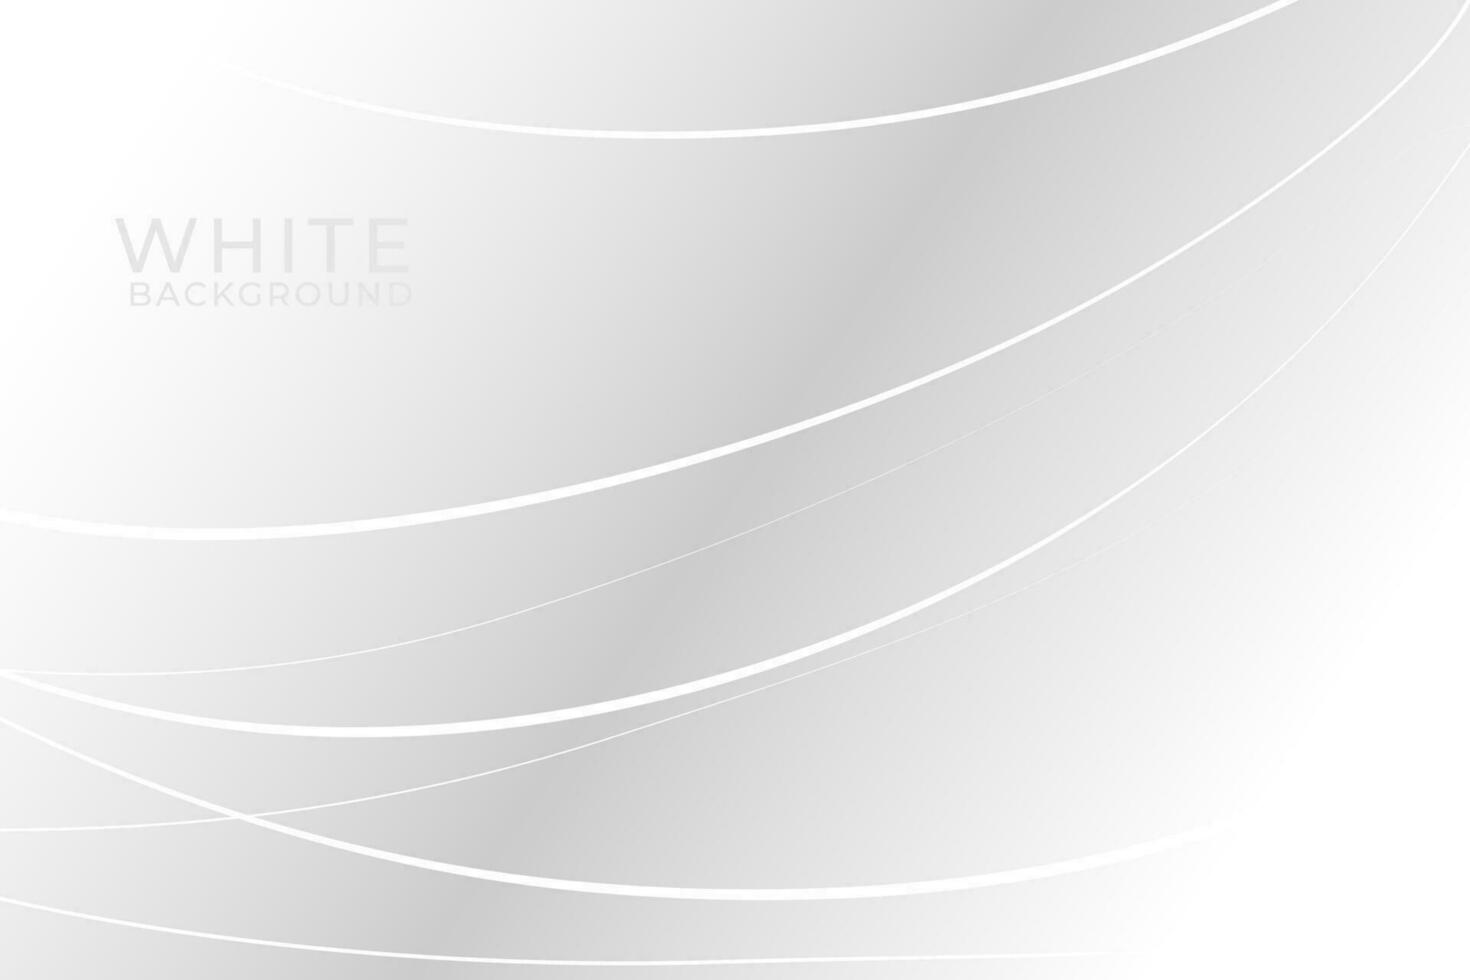 Abstract white and grey background with line shapes vector